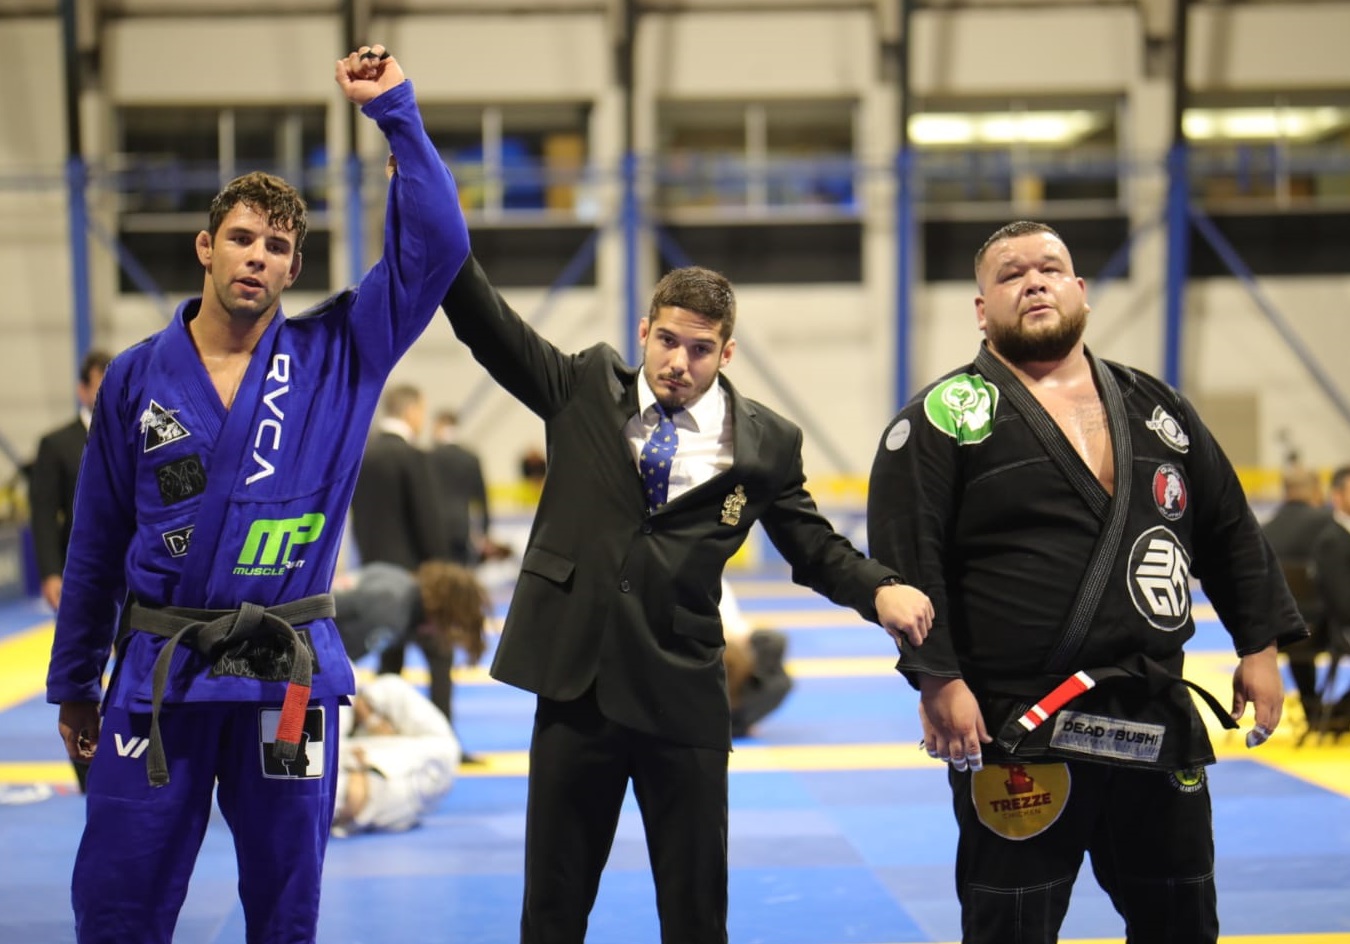 2019 Worlds: See who fights whom in the final stretch